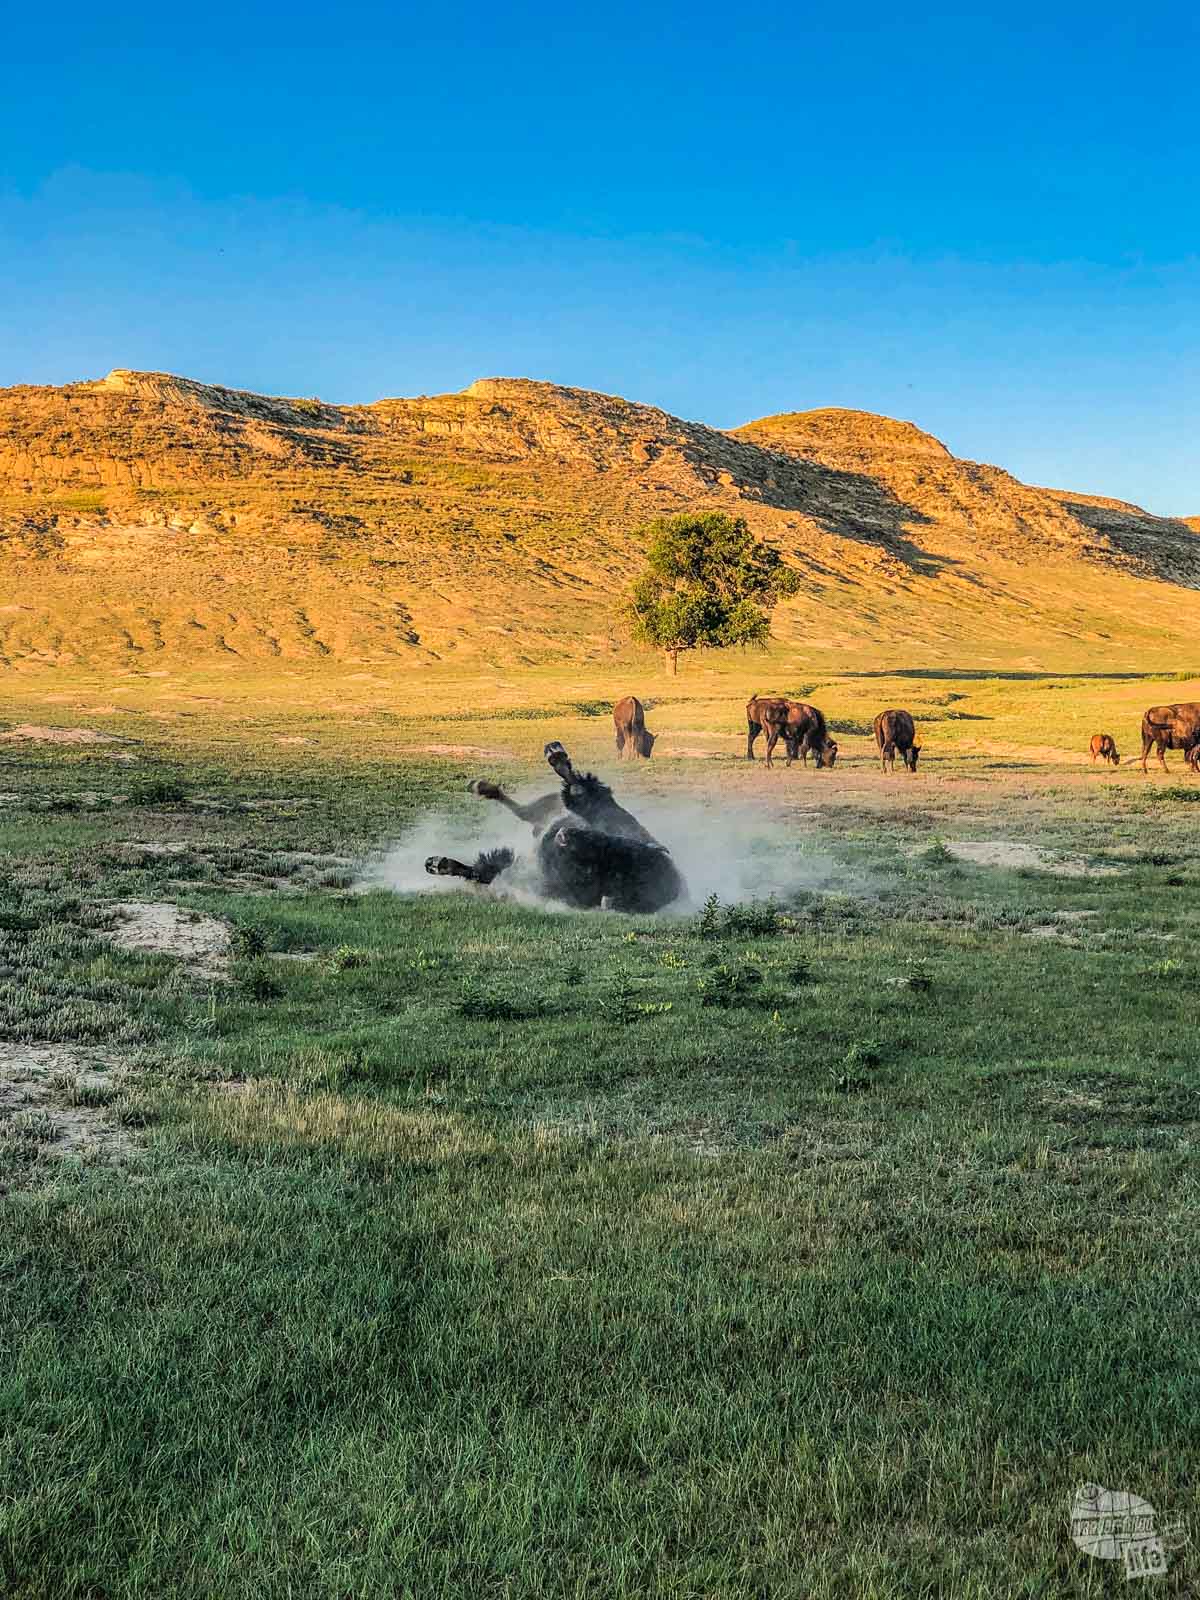 A bull bison wallowing in Theodore Roosevelt National Park.